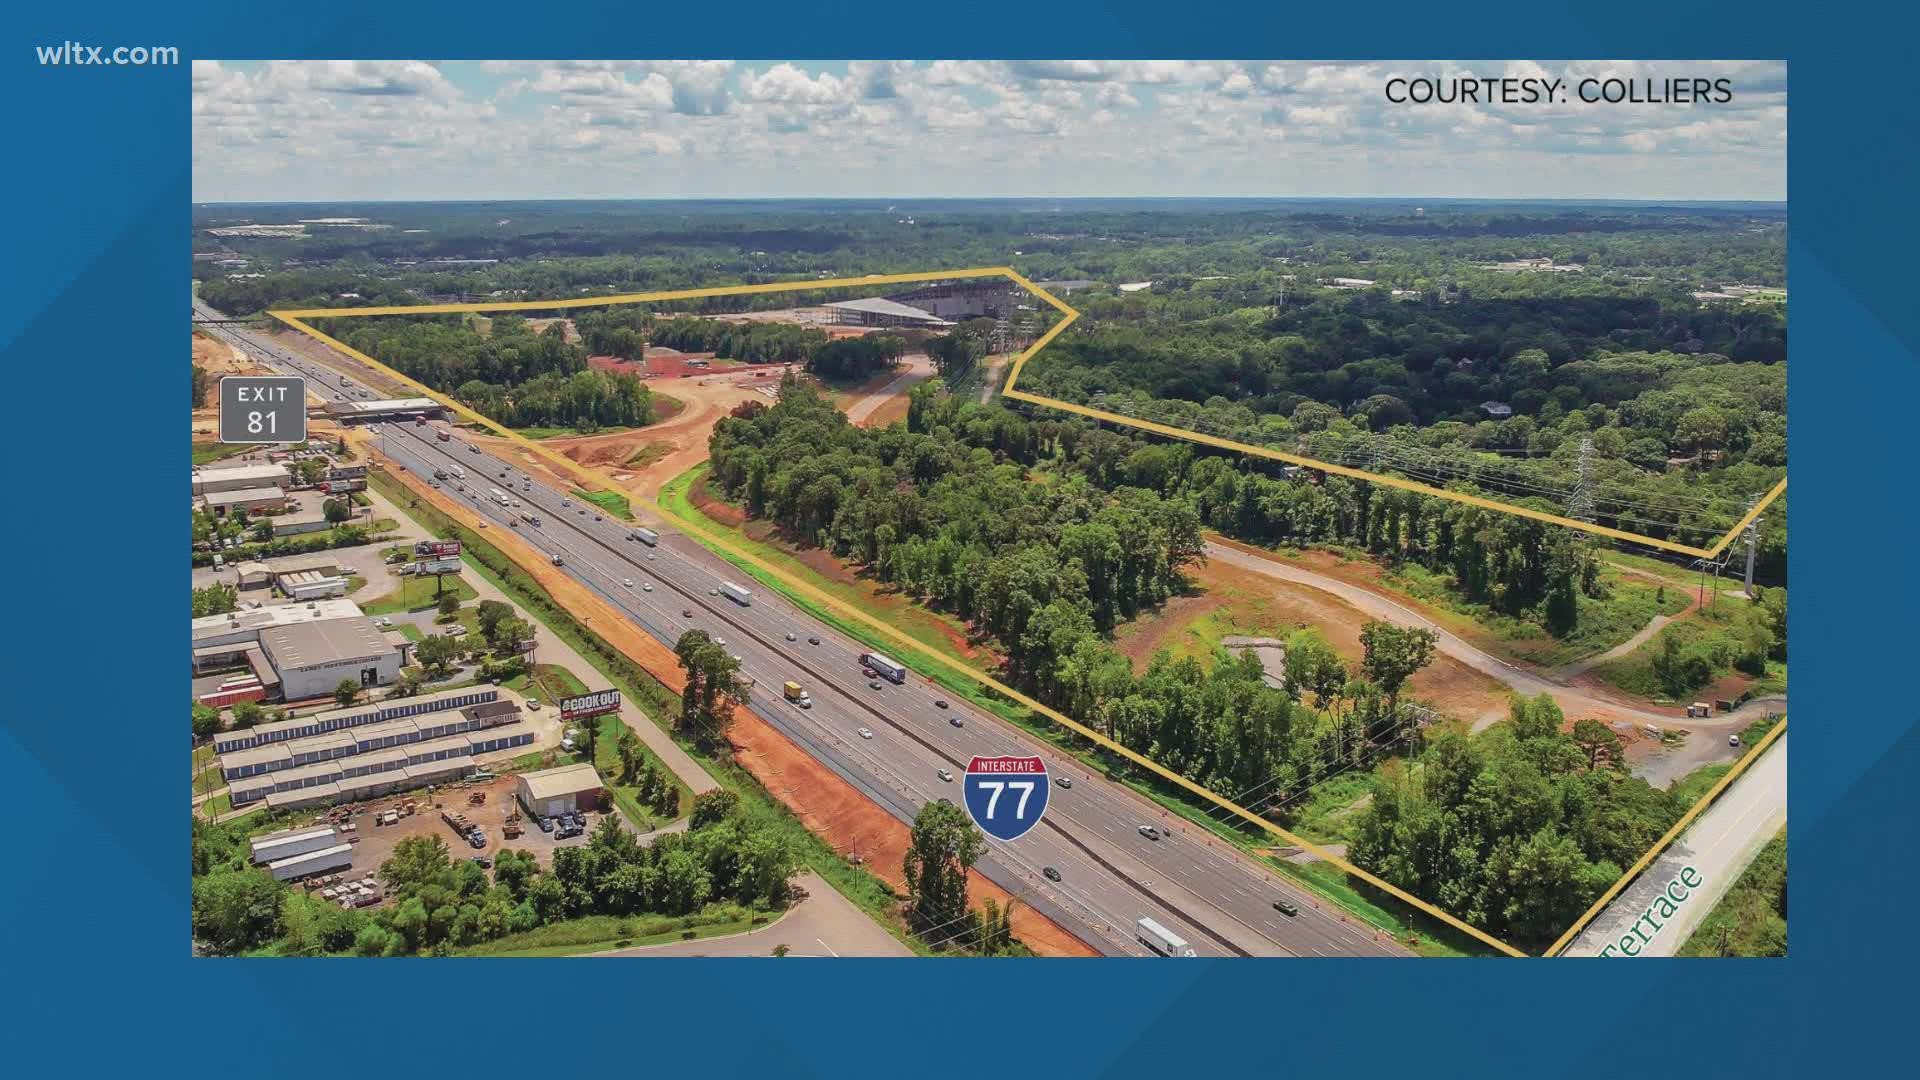 The Colliers commercial real estate firm has listed the land, named "Rock Hill Overlook," as a mixed-used development site.